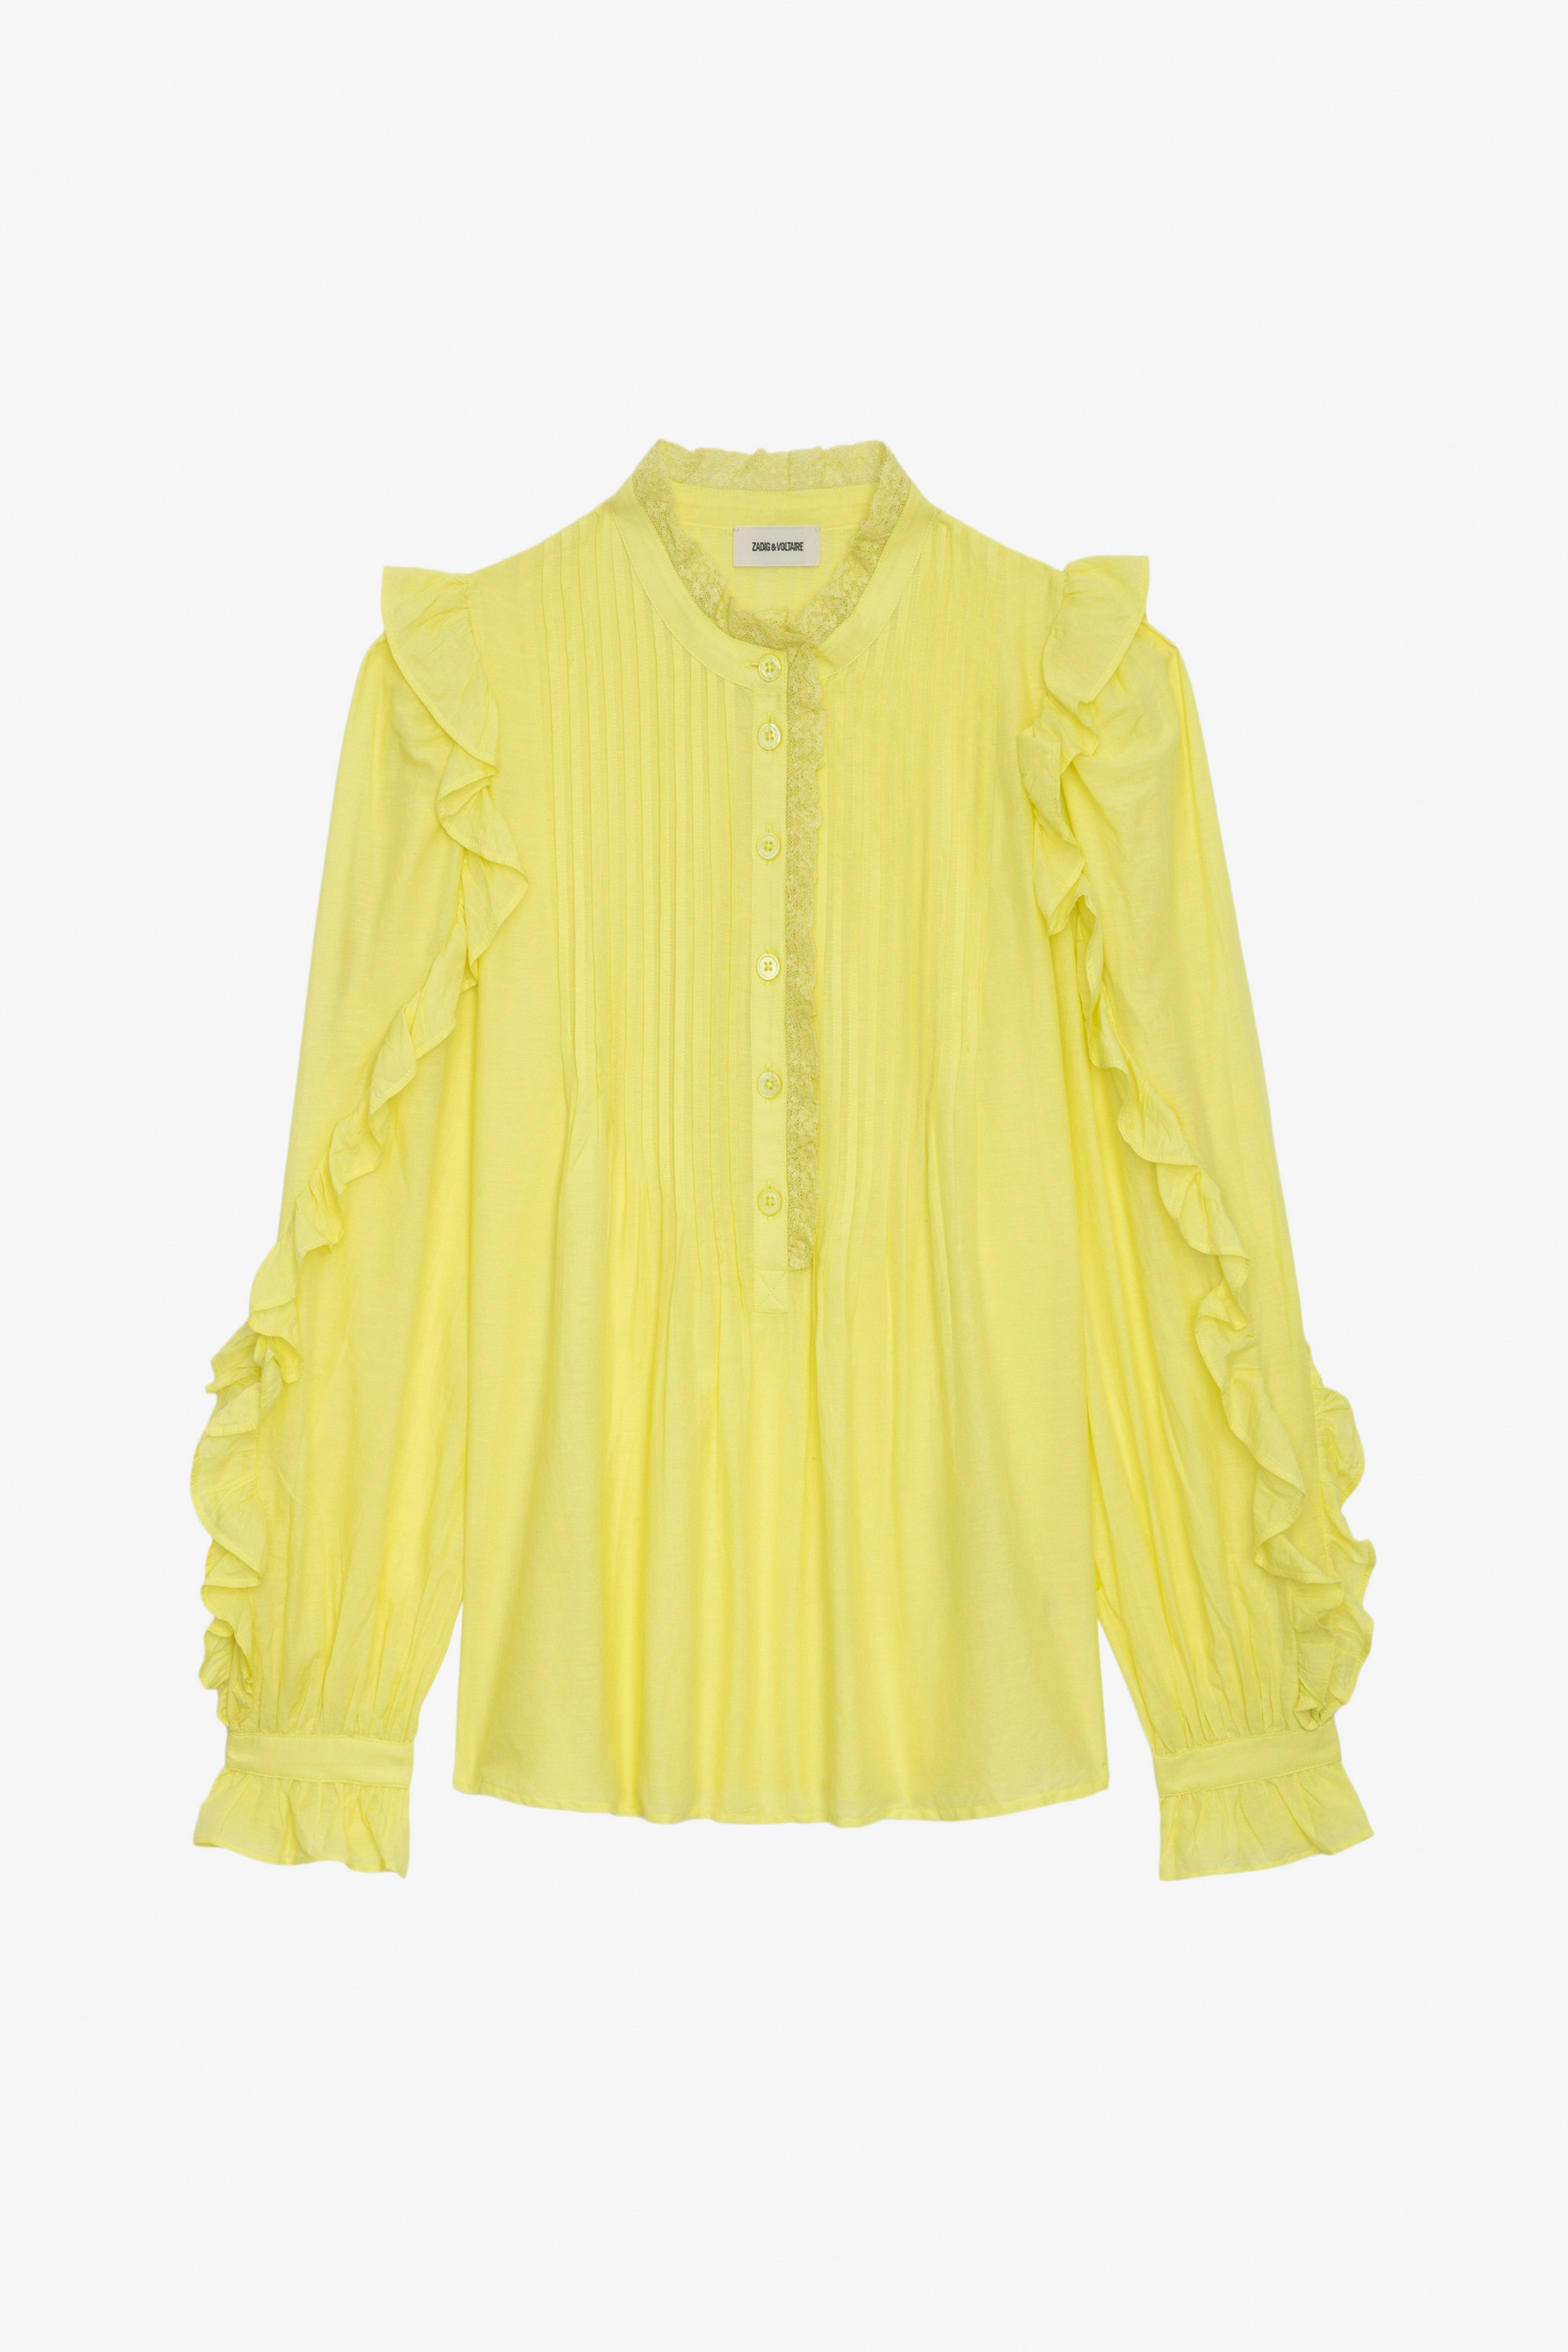 Timmy Blouse - Light yellow cotton blouse with long sleeves and ruffles.